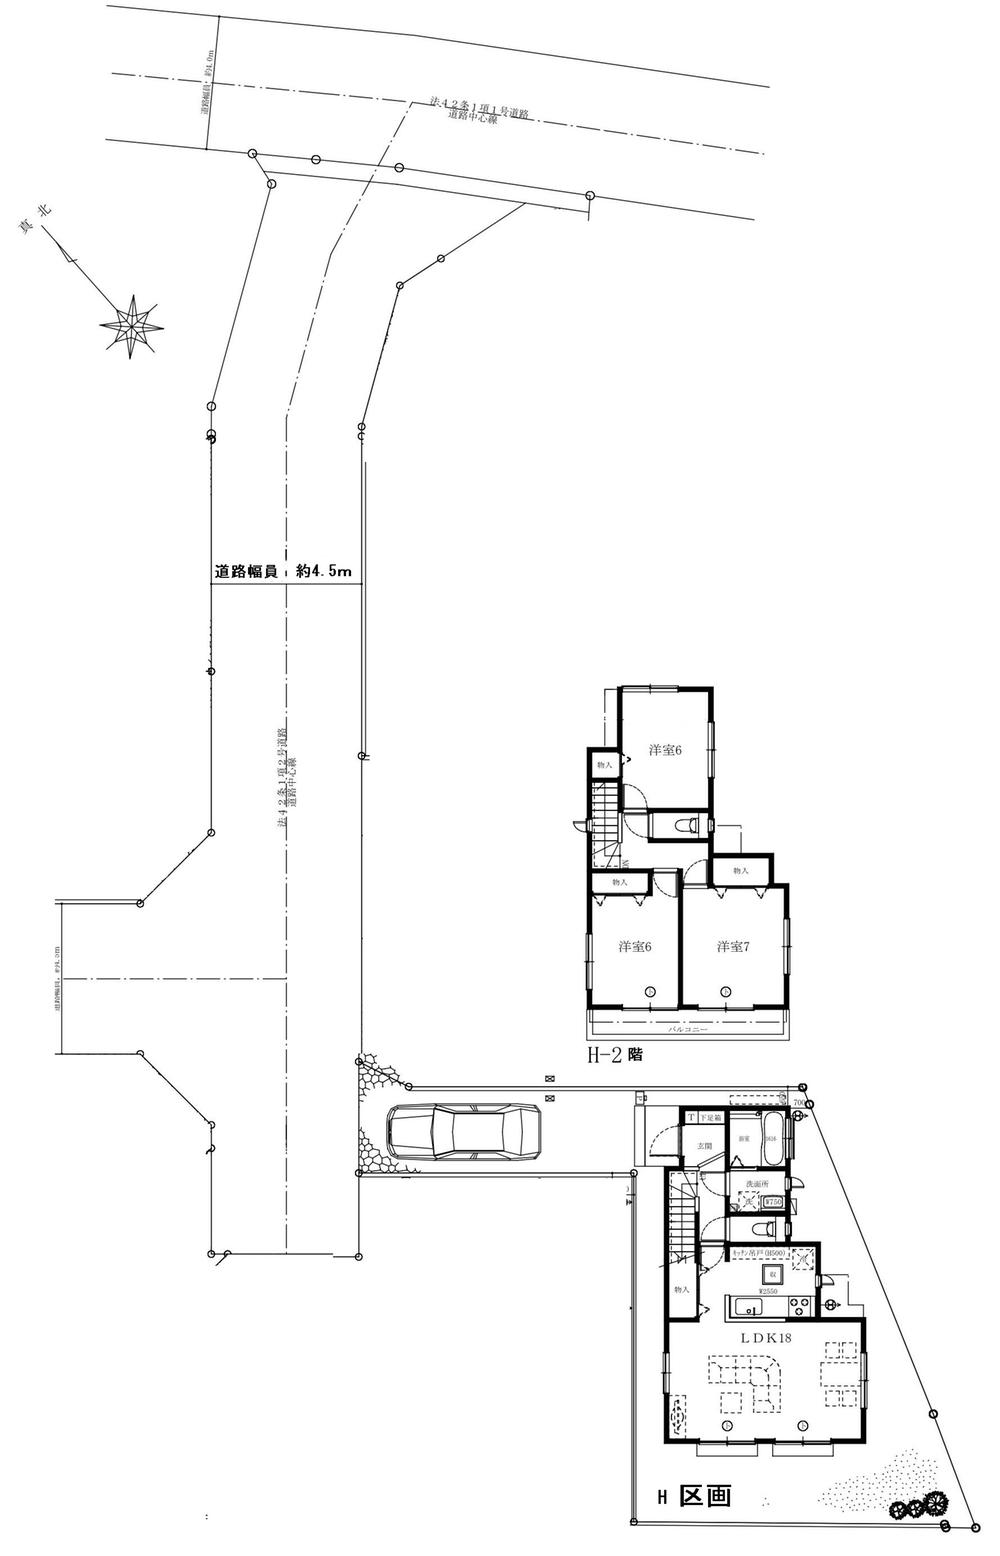 Compartment view + building plan example. Building plan example (H compartment) 3LDK, Land price 14,390,000 yen, Land area 120.83 sq m , Building price 9.41 million yen, Building area 89.01 sq m